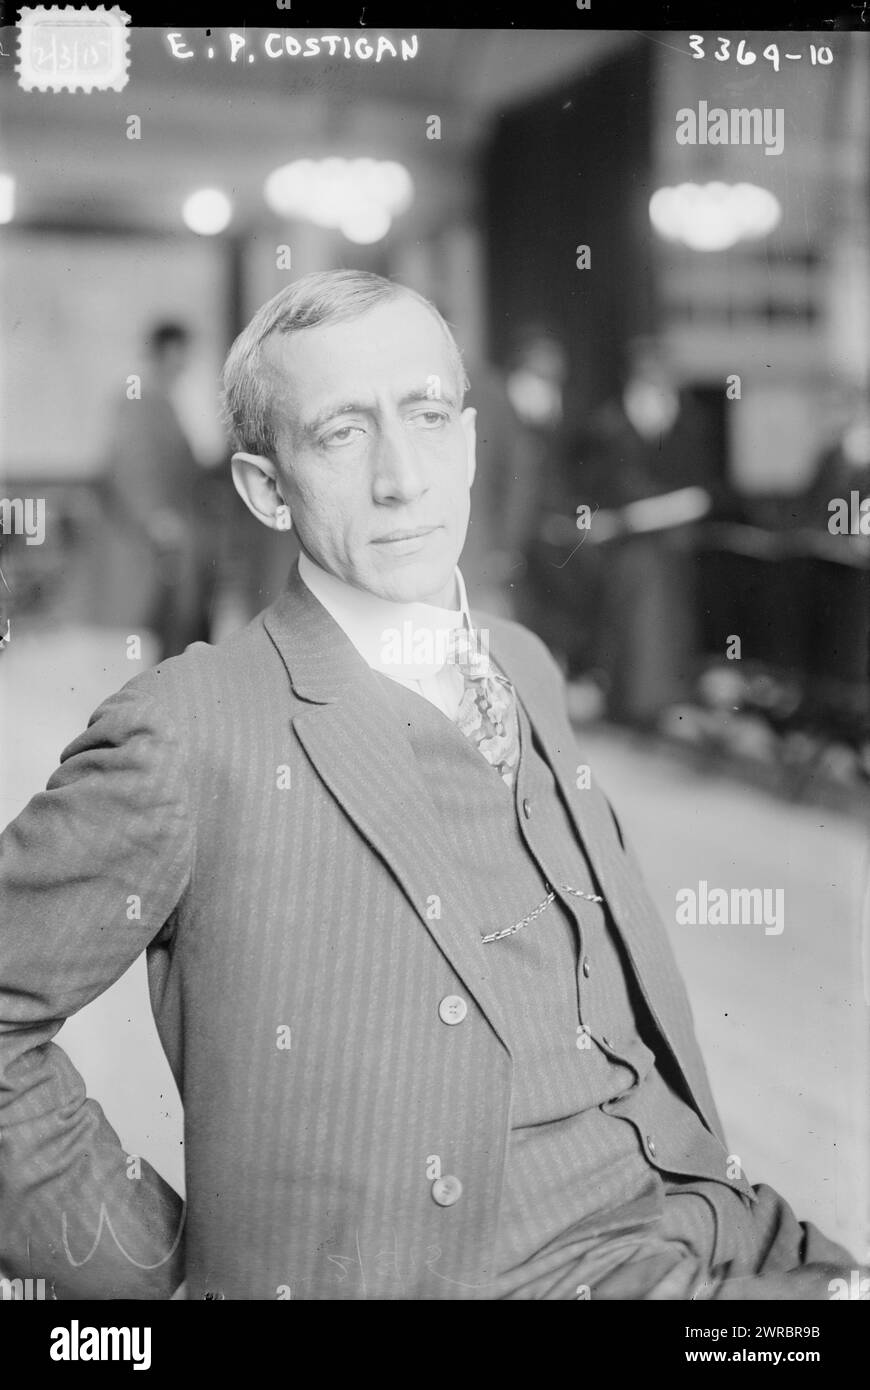 E.P. Costigan, Photograph shows Edward Prentiss Costigan (1874-1939) who was a founder of the Progressive Party in Colorado and Colorado Senator from 1931 to 1937. Costigan testified at the 1915 hearings of the federal Commission on Industrial Relations in New York City., 1915 Feb. 3, Glass negatives, 1 negative: glass Stock Photo